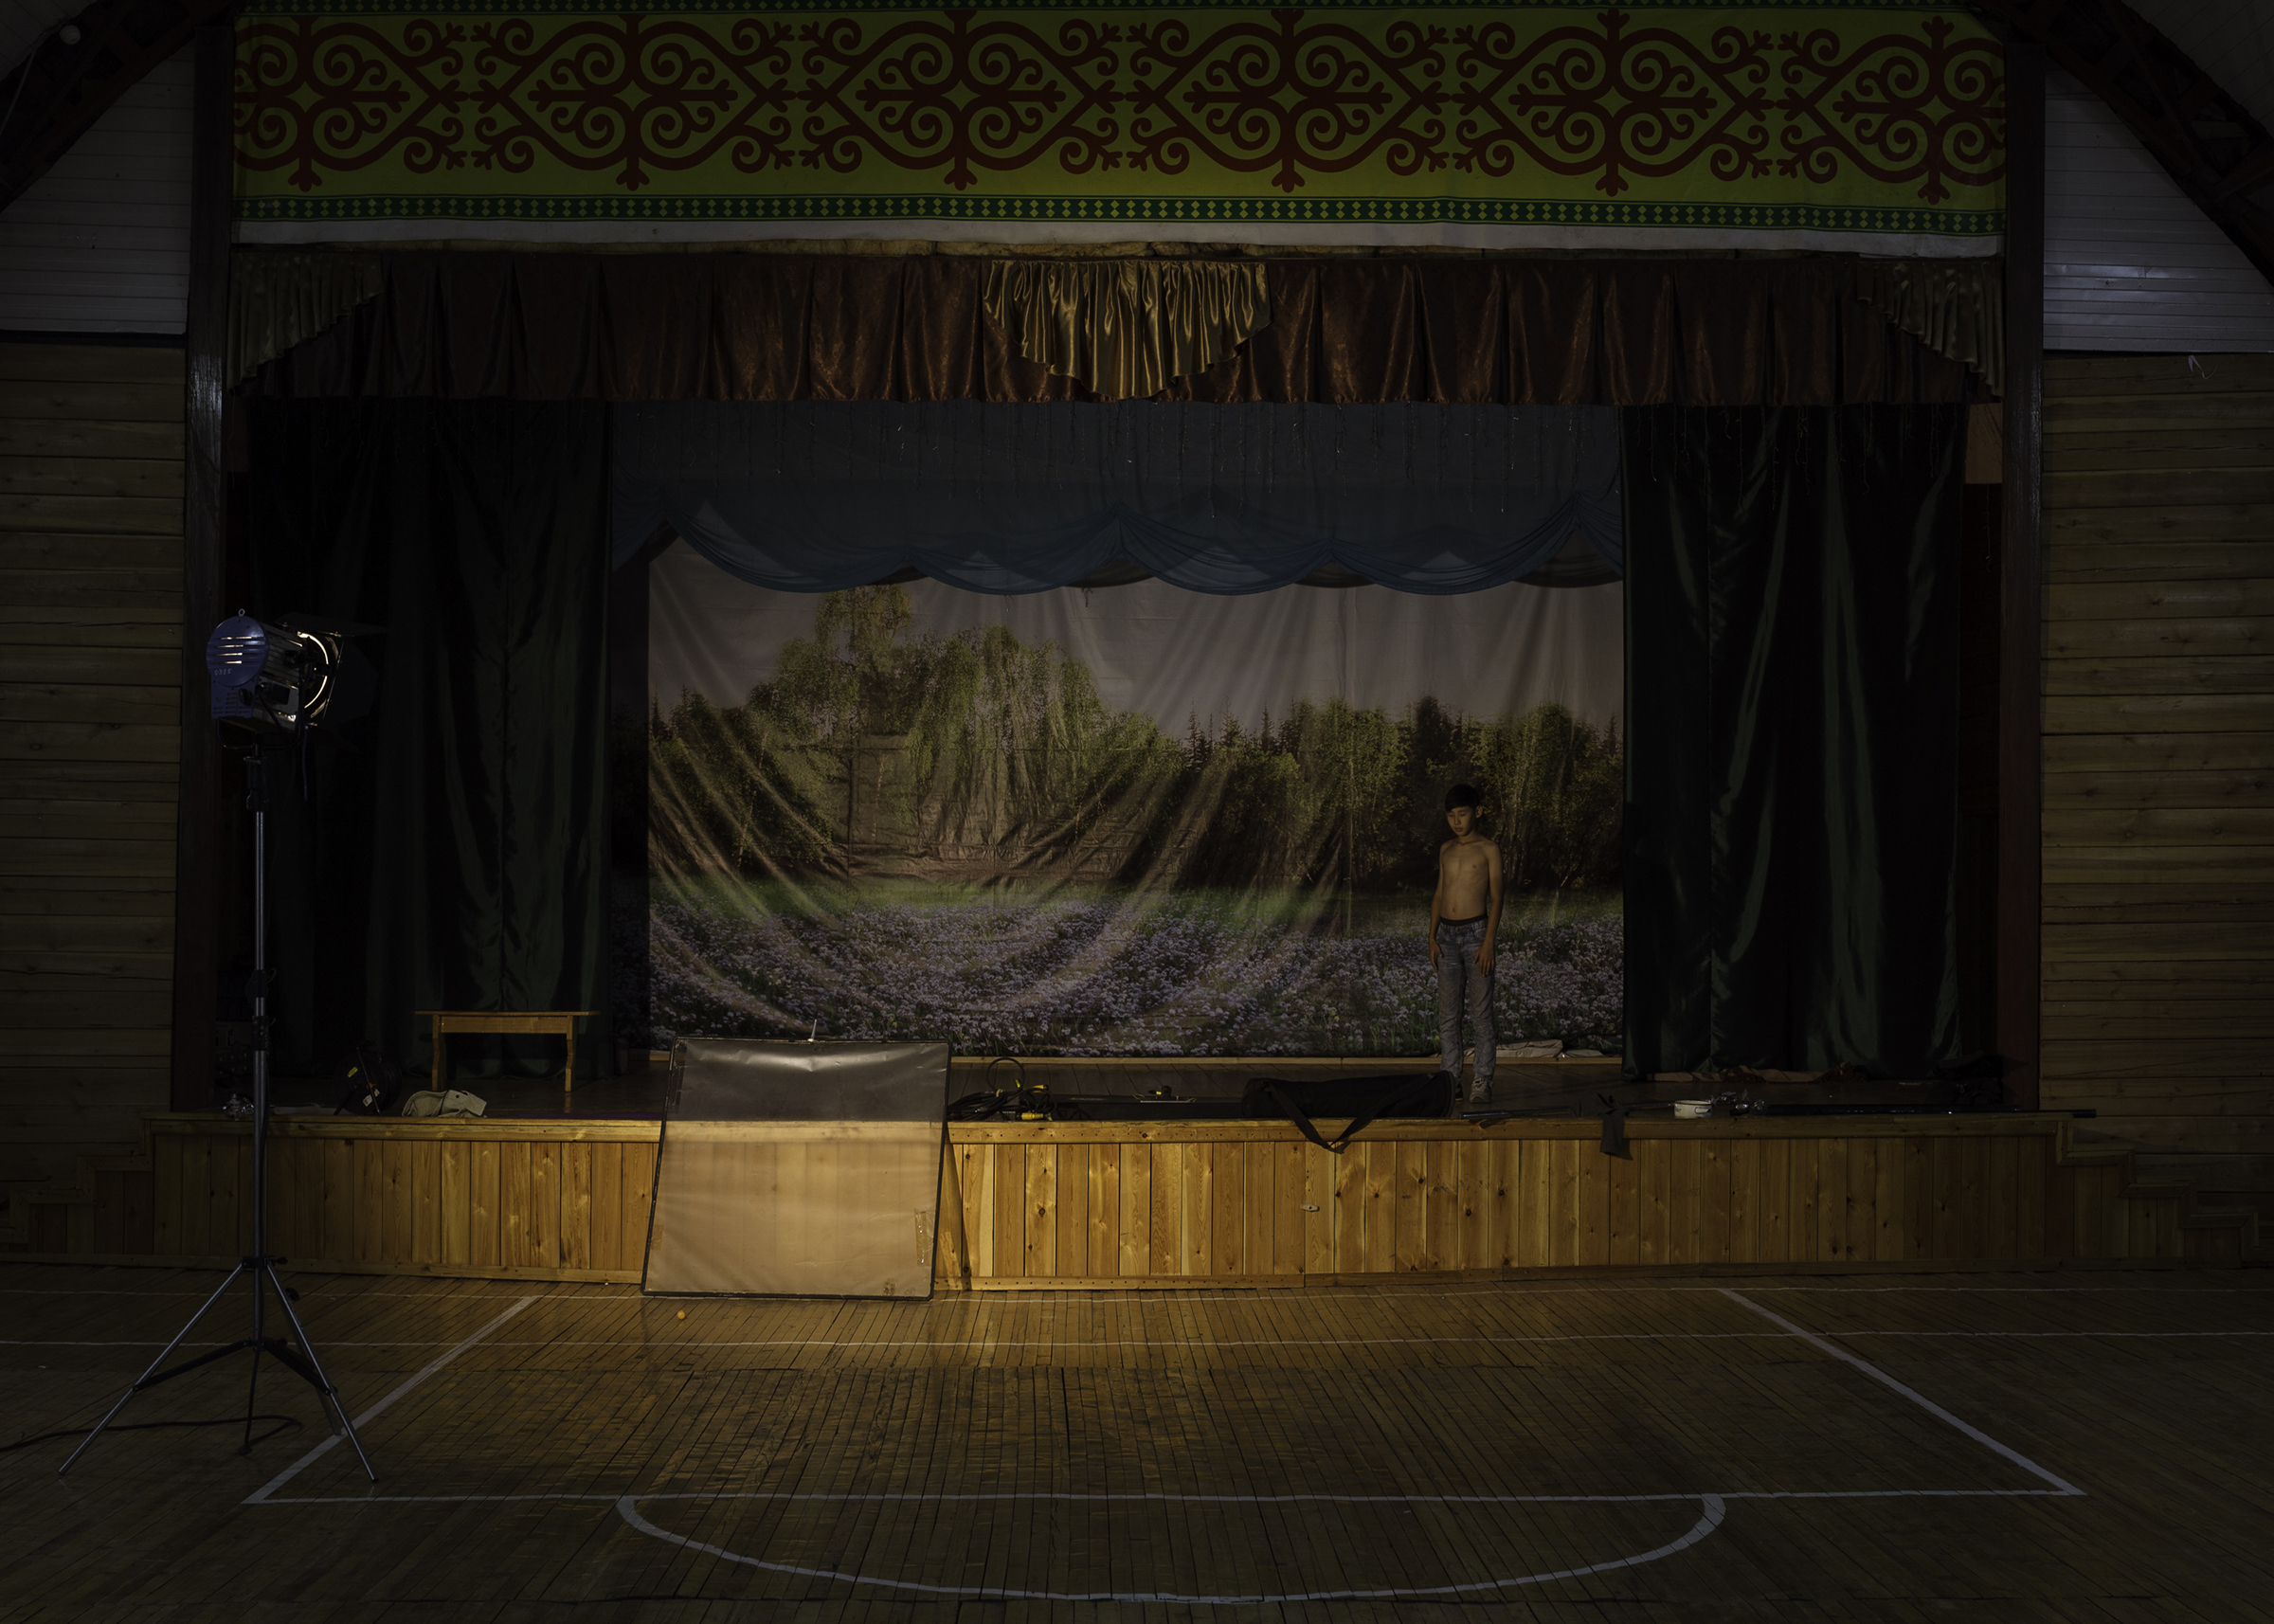 The theater stage in Nikoltsy village in Yakutia, in Aug. 2019. It is also used as a sports hall and cinema. (Alexey Vasilyev)